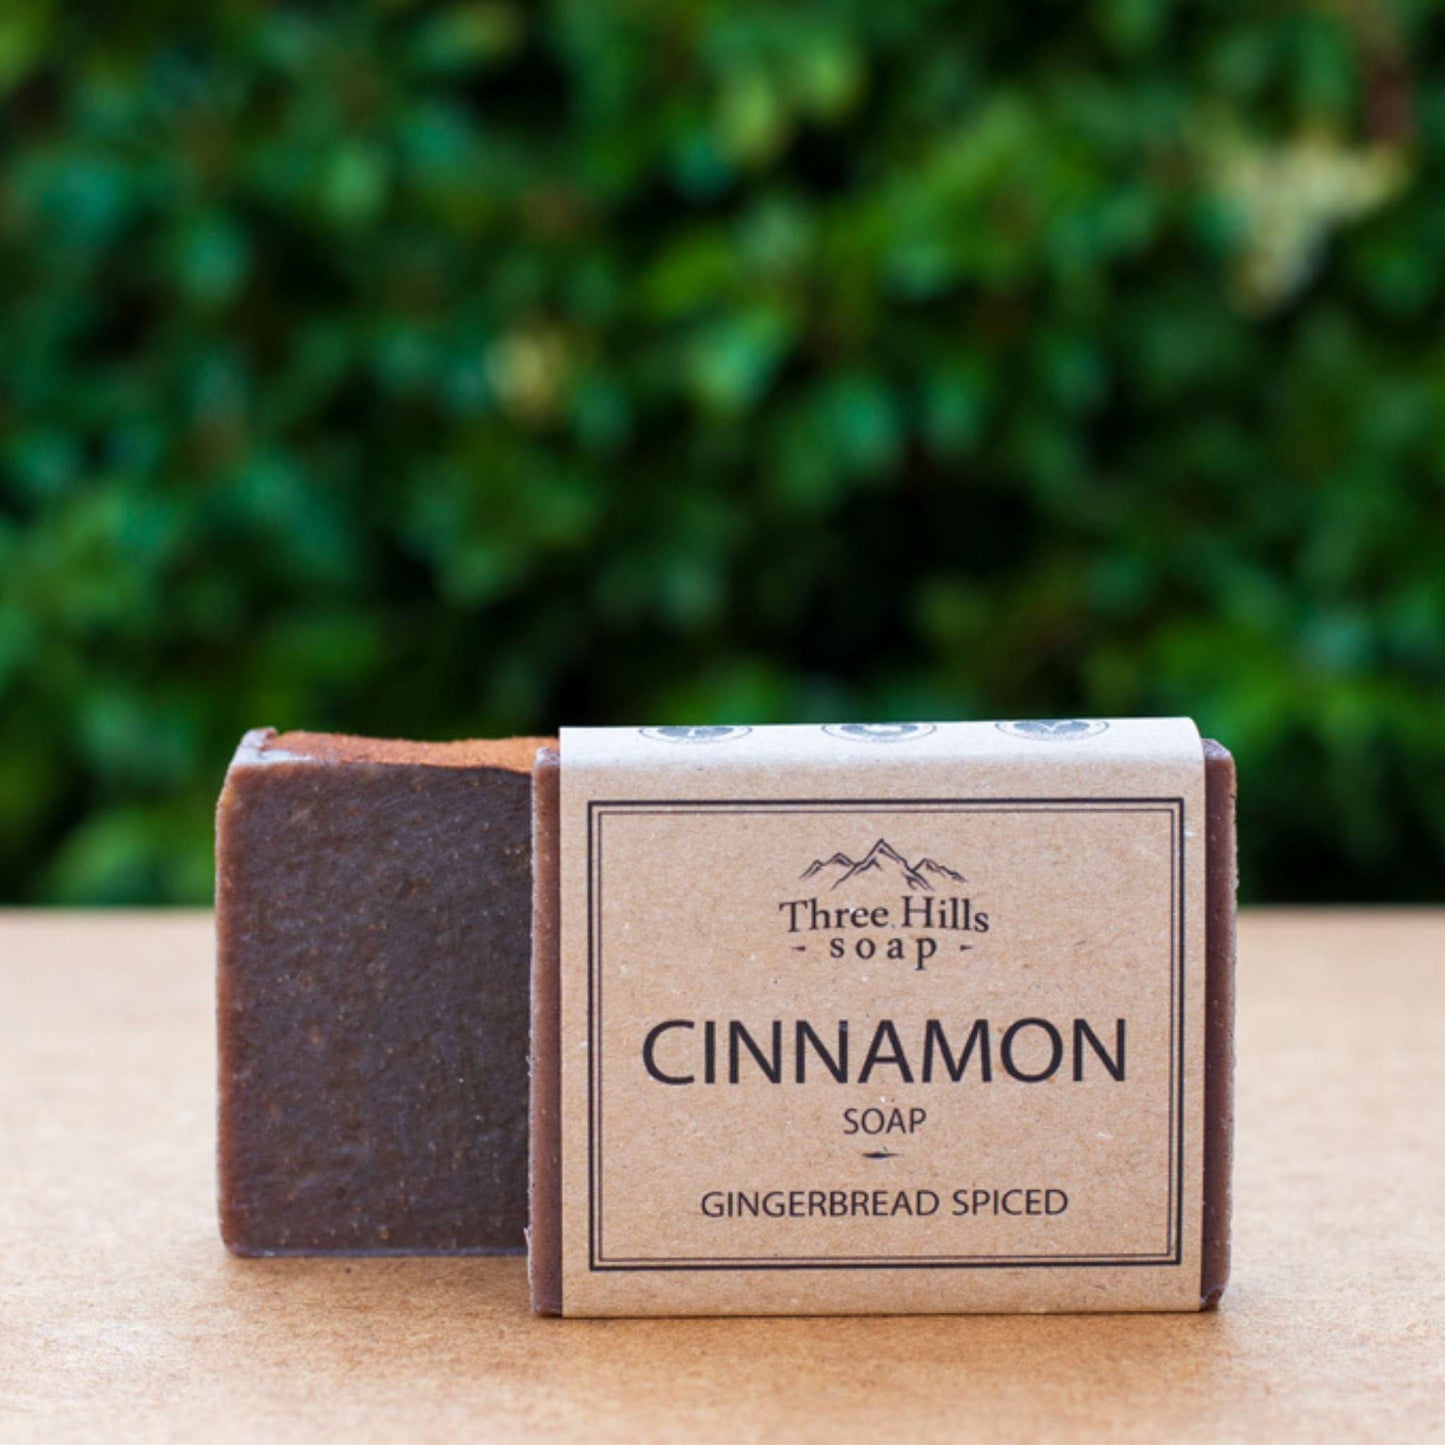 Load image into Gallery viewer, Three Hill Soaps Soap Cinnamon Gingerbread Spiced Soap - Three Hills Soap
